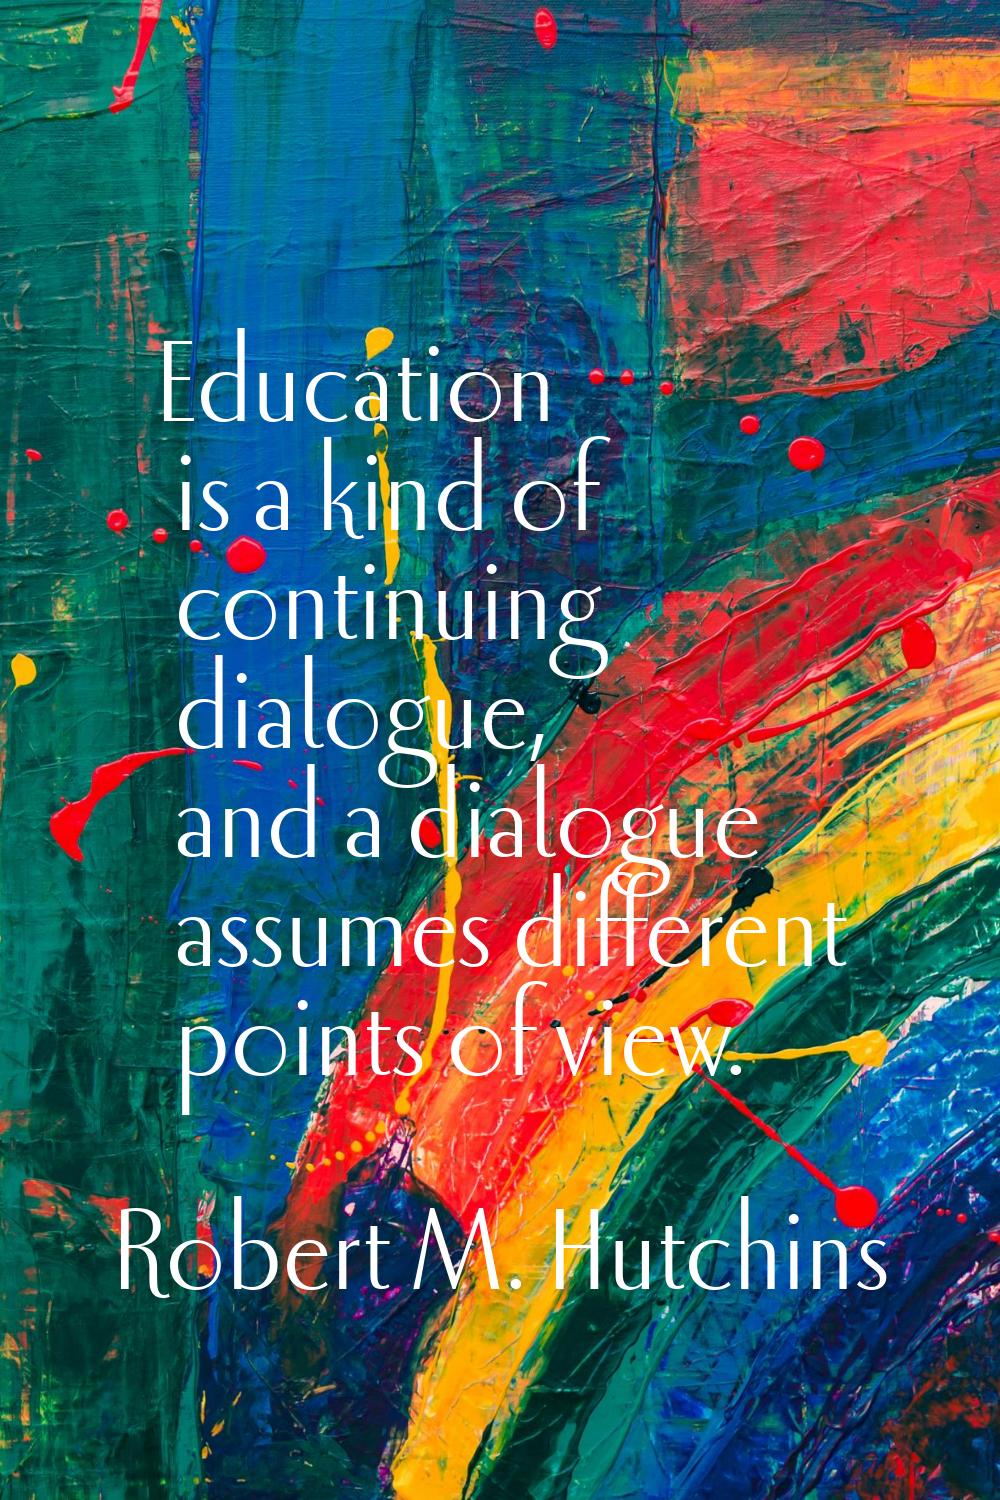 Education is a kind of continuing dialogue, and a dialogue assumes different points of view.